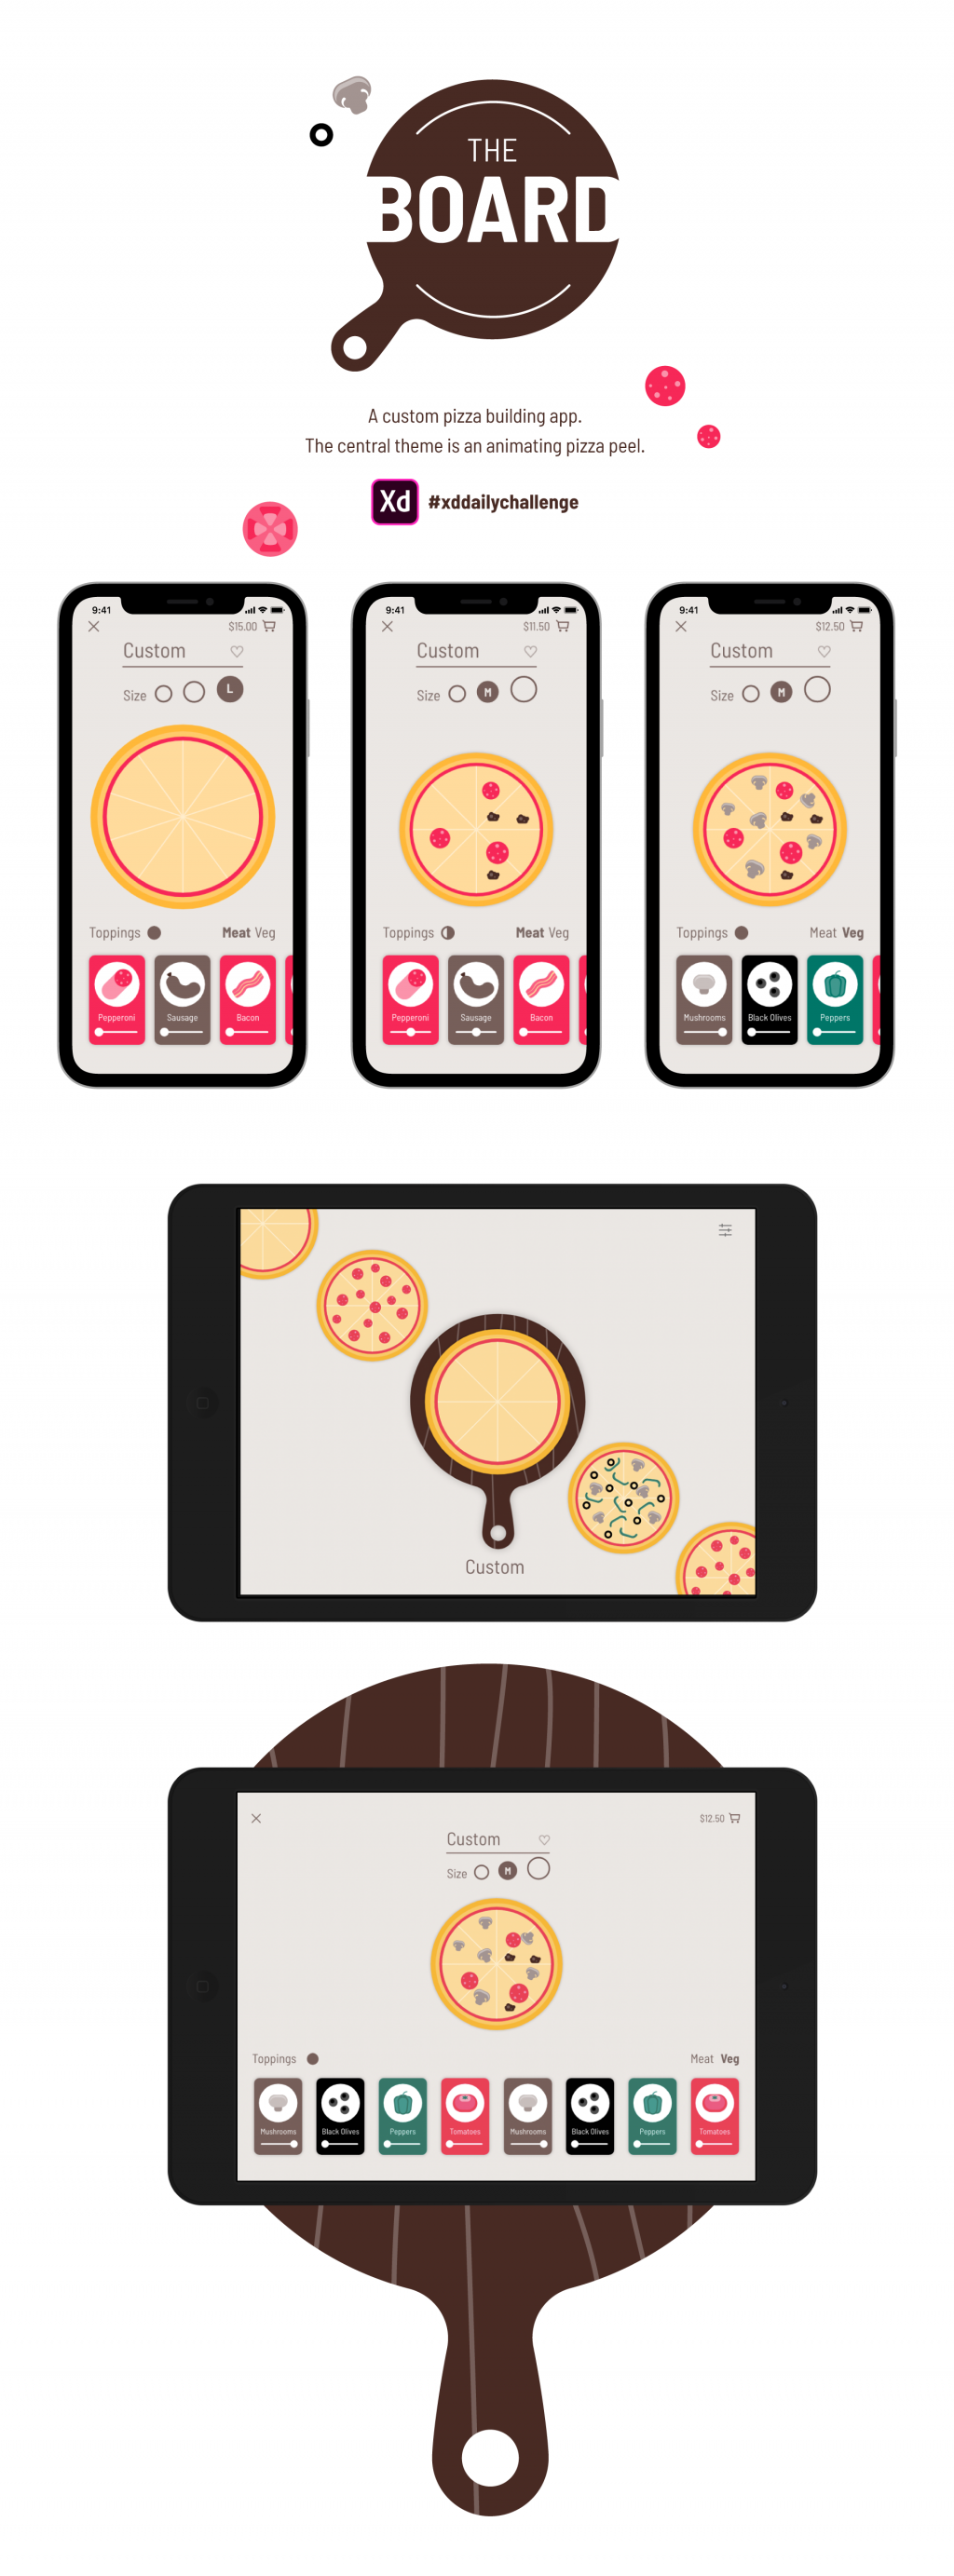 Mockup for a design for a custom pizza ordering app.